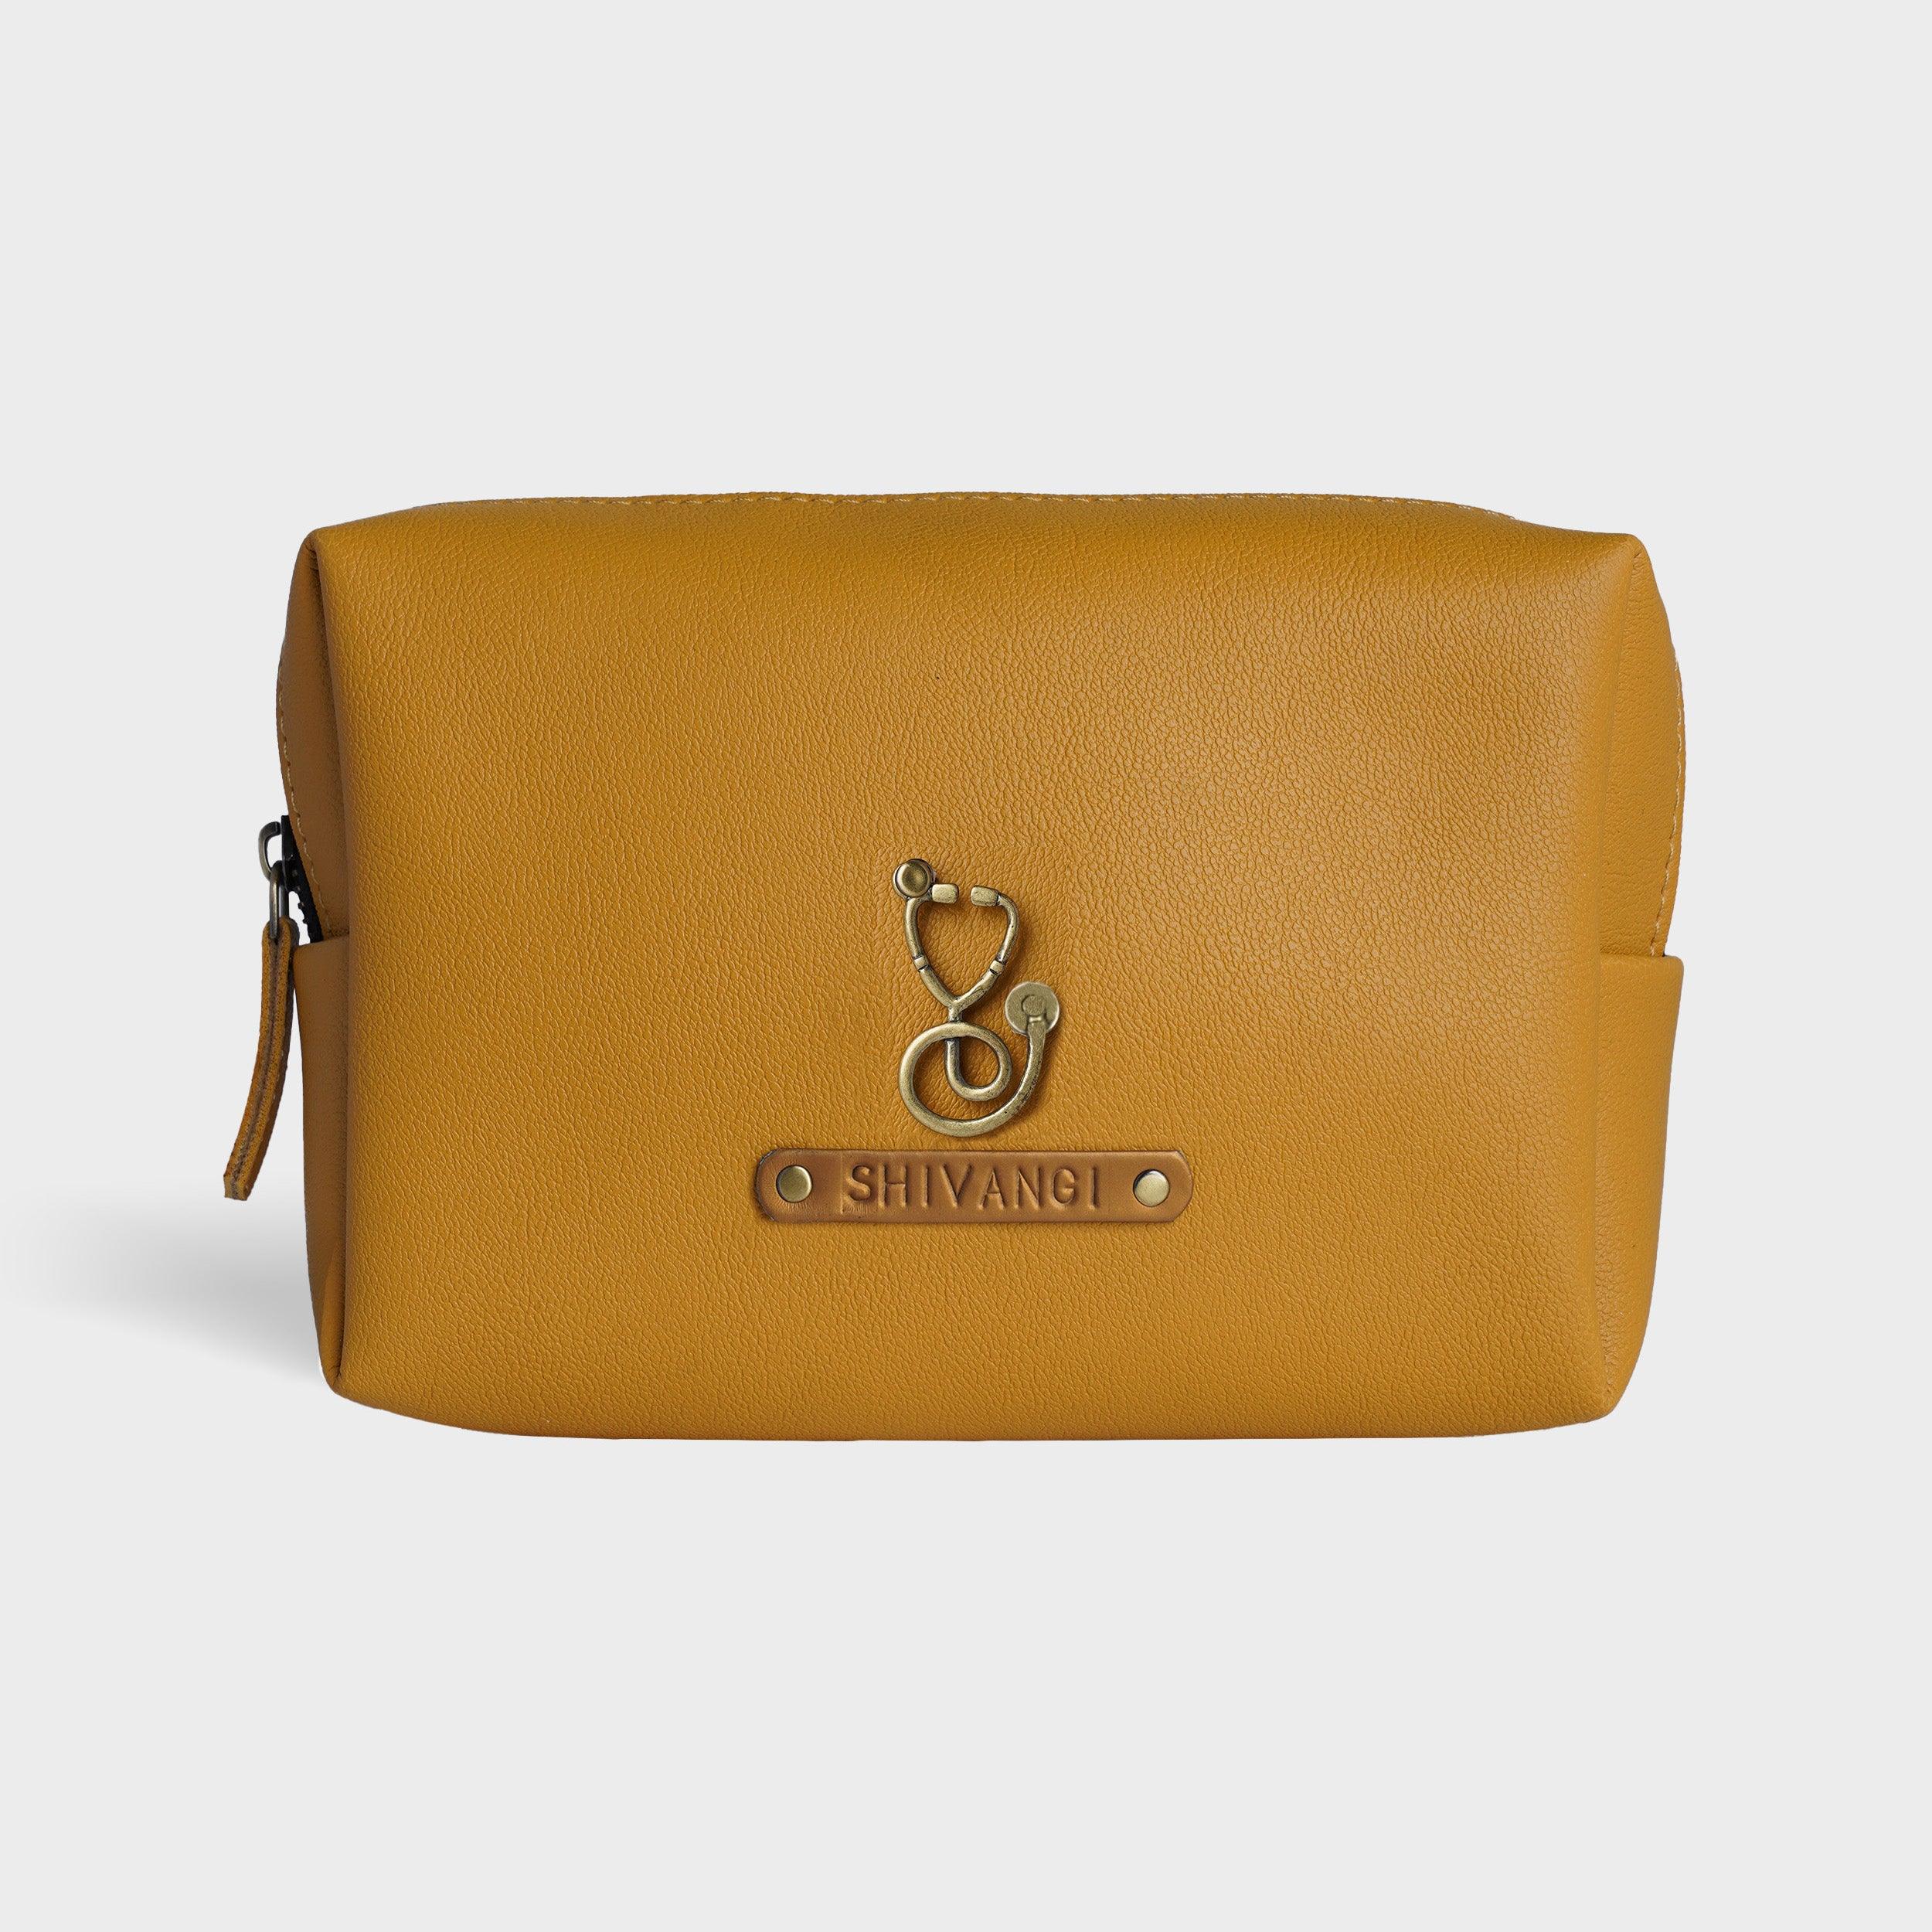 Personalised Travel Pouch - Travelsleek